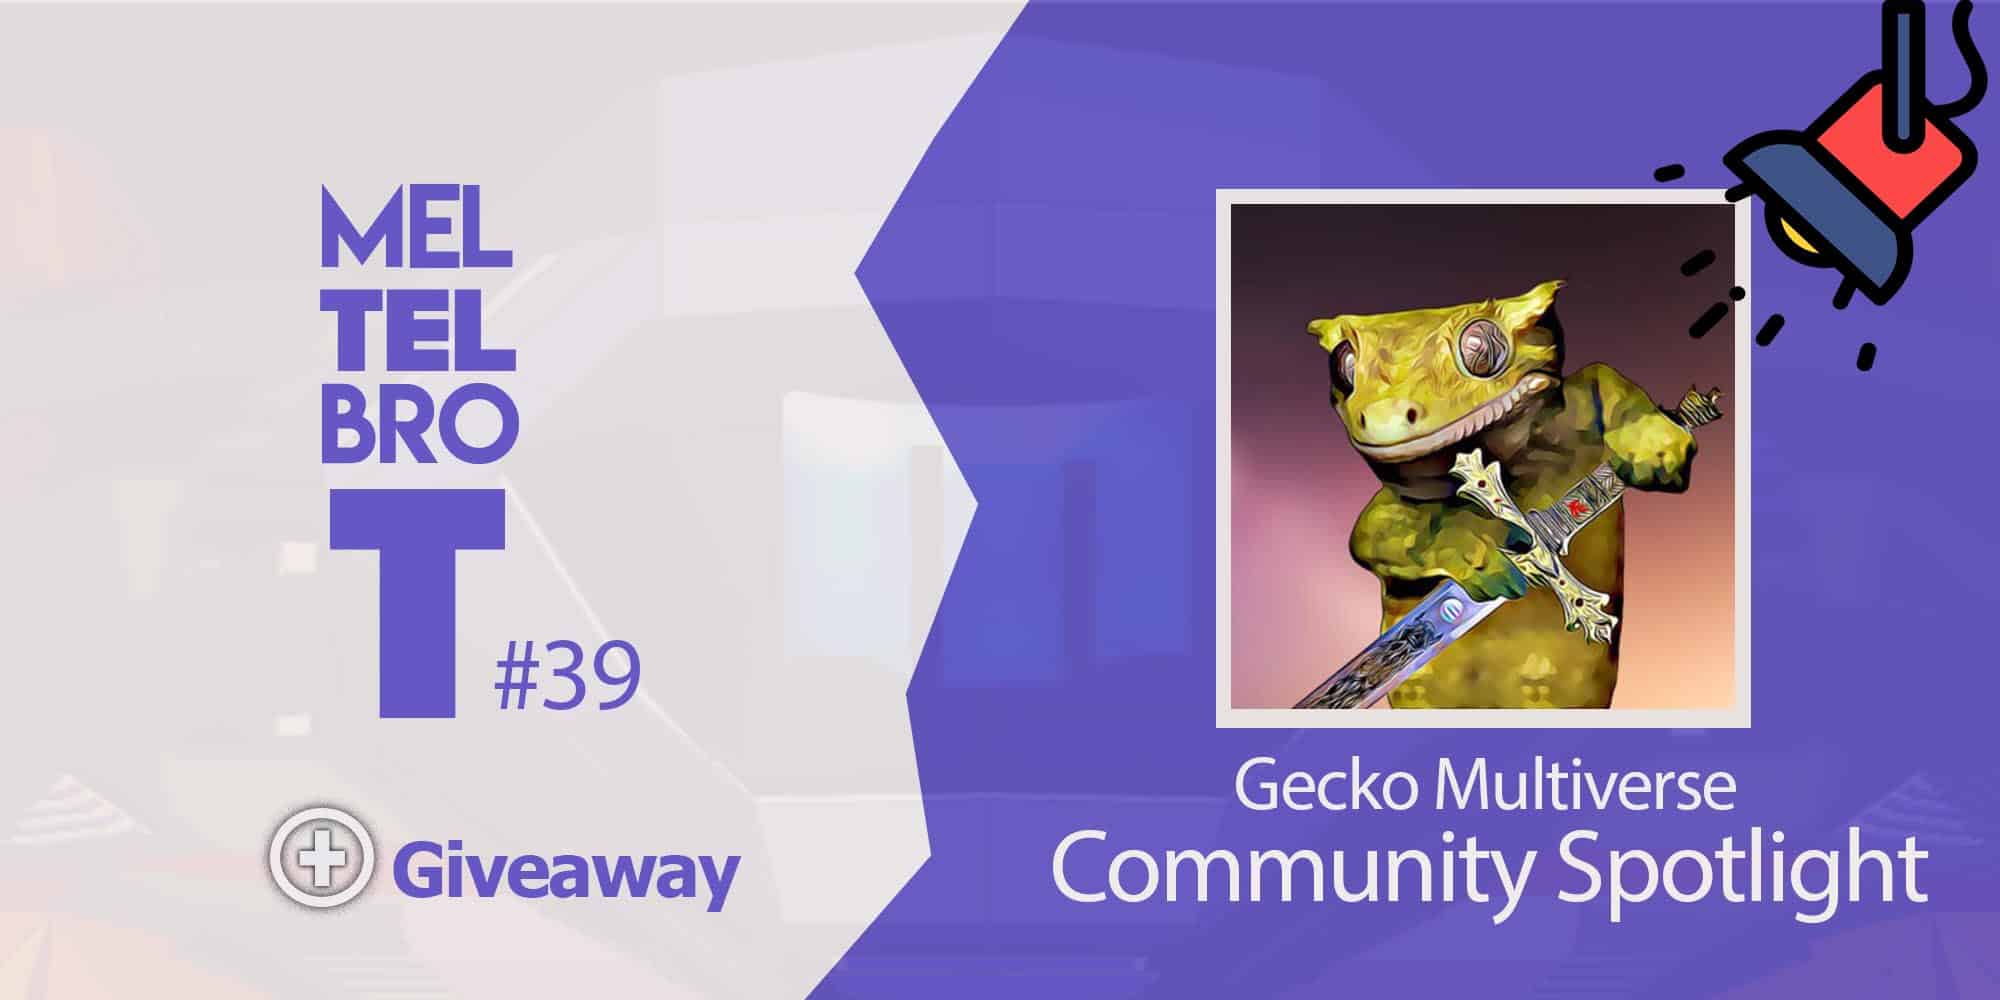 Meltelebrot 39 Geckomultiverse Today I’m chatting with Gecko Multiverse, an Enjin community member and long time friend of the Multiverse Brotherhood, who has really taken time out to show what can be done in the Enjin Ecosystem. He took the courage to approach developers to implement his community items into their games, and showed what could be achieved by anyone with cooperation and enthusiasm. You’ve probably seen some of his fun videos showing how such items can work in games like, Forgotten Artifacts. I think it’s great to see what such active community members are up to, and find out what drives them to share their gaming experiences. Let’s get the down low from the gecko:)